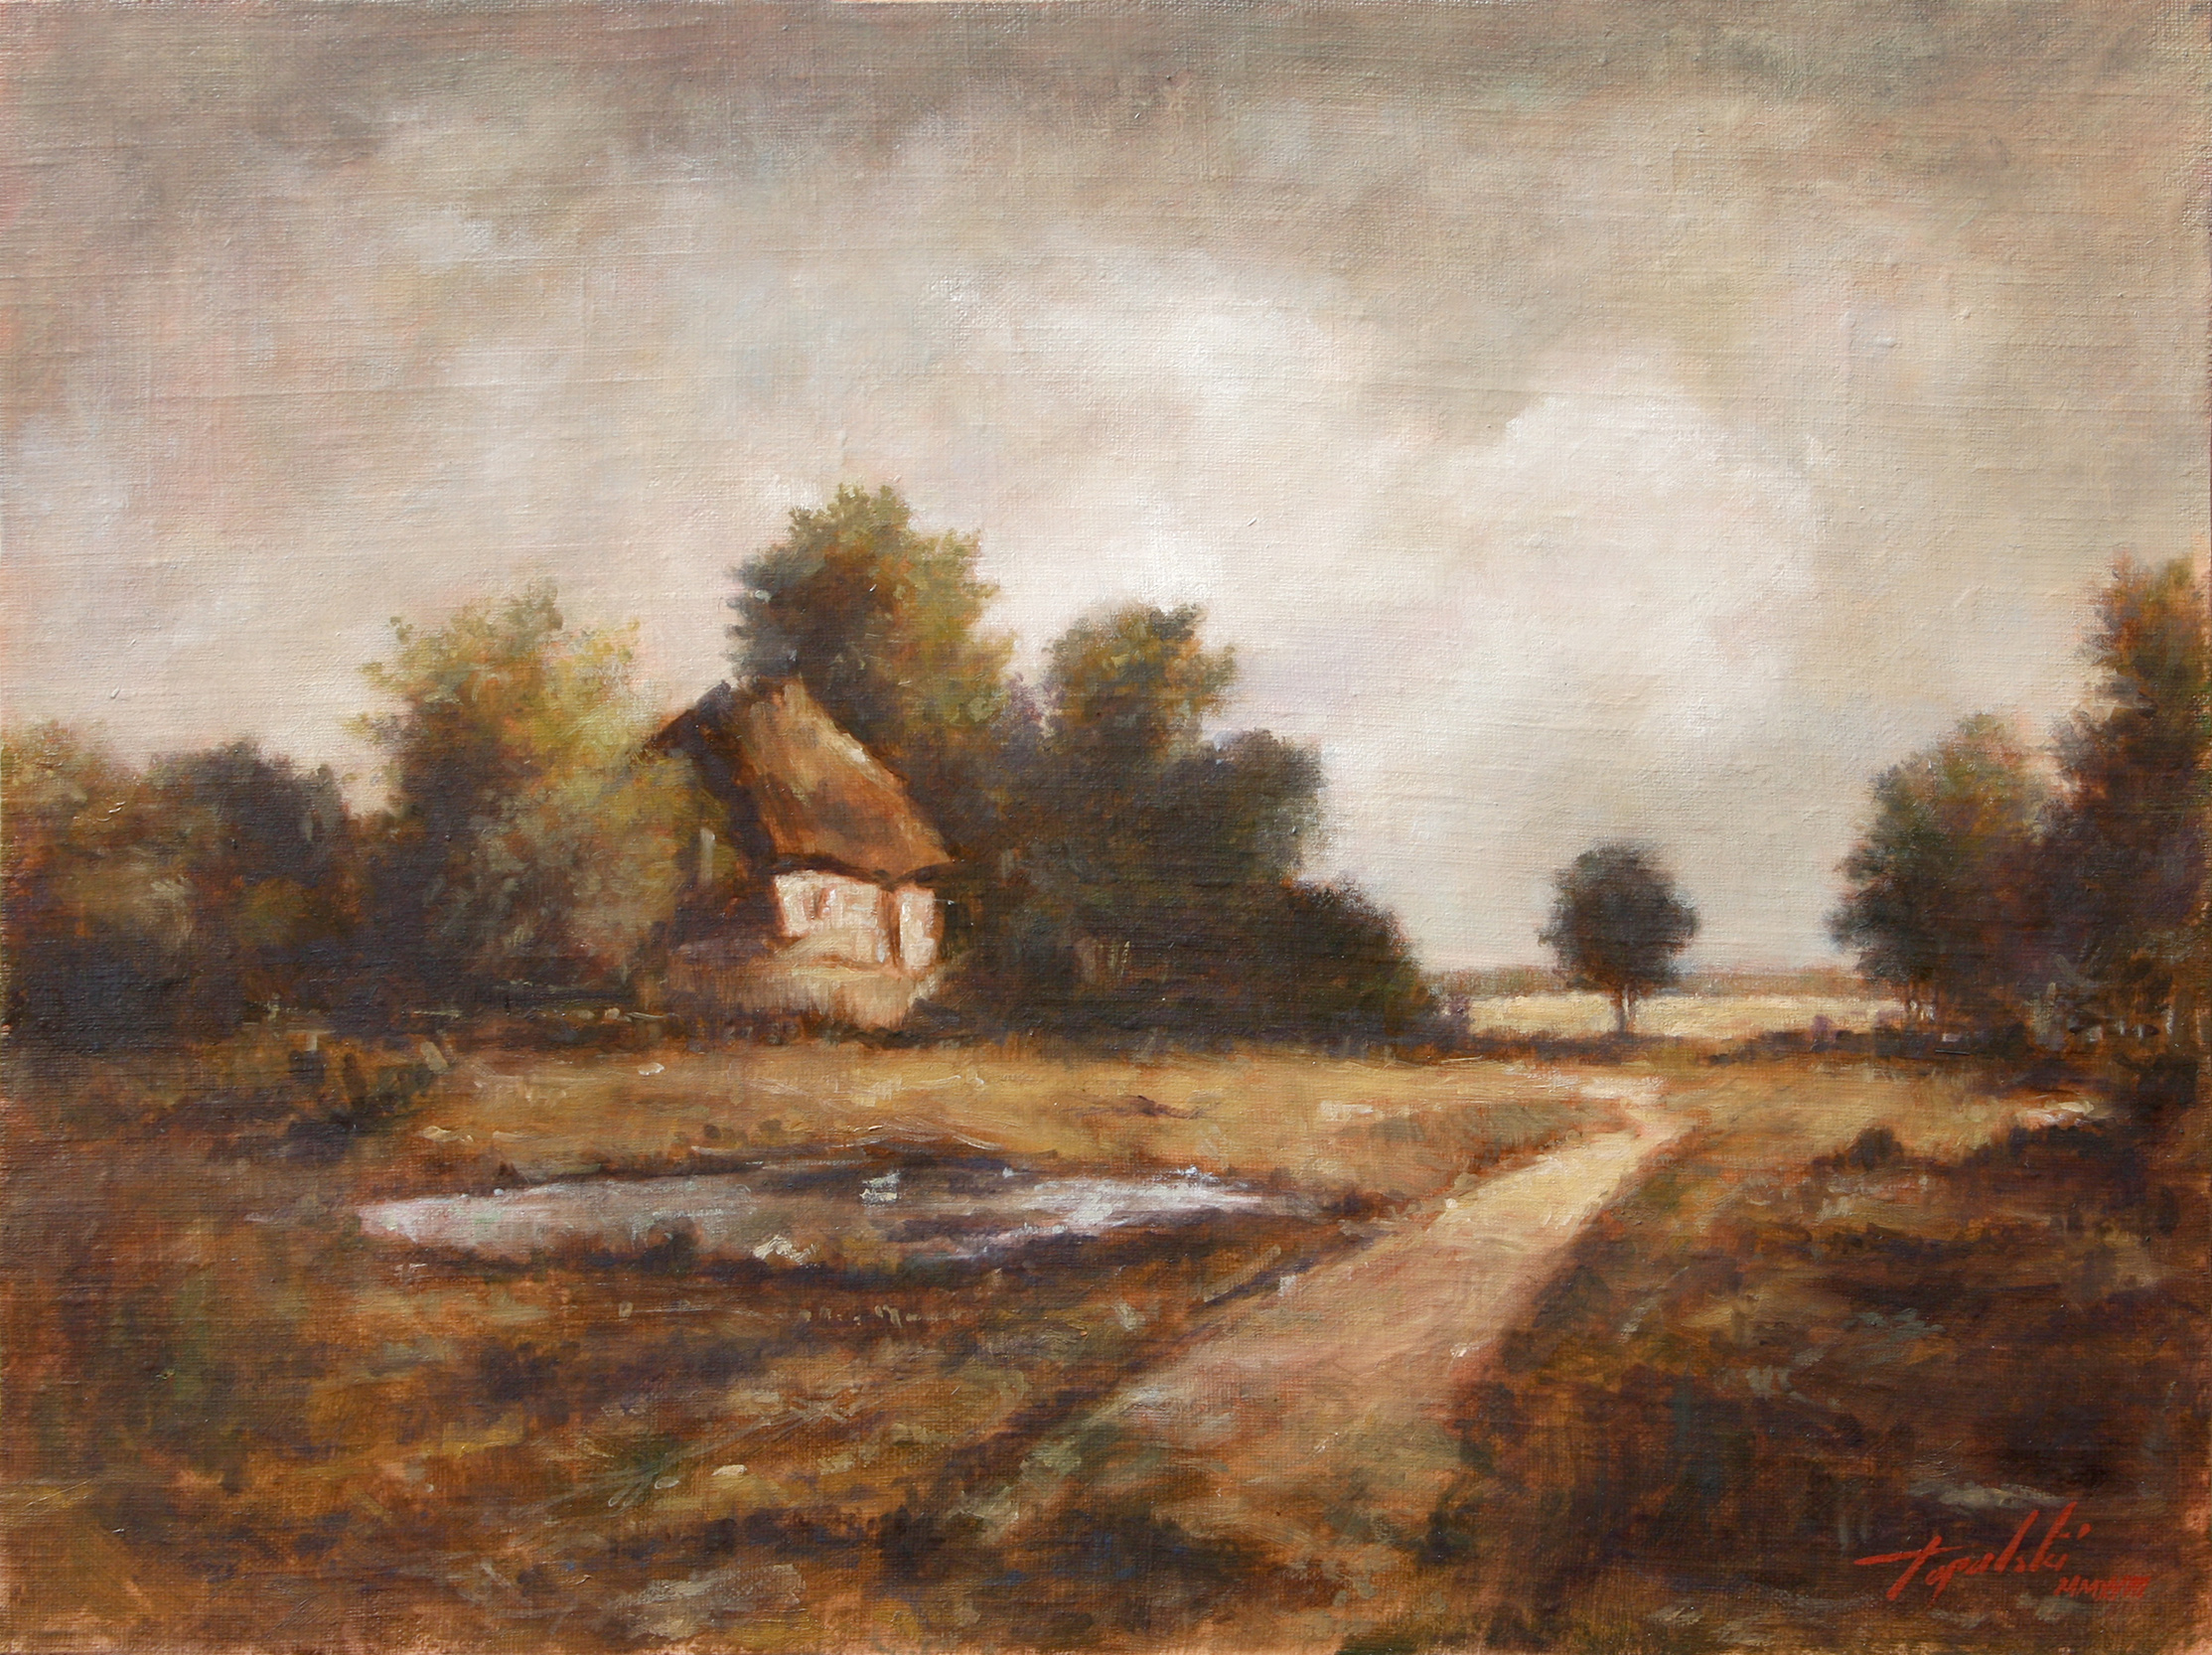 At the end of the road - Landscape Oil painting - Fine Arts Gallery